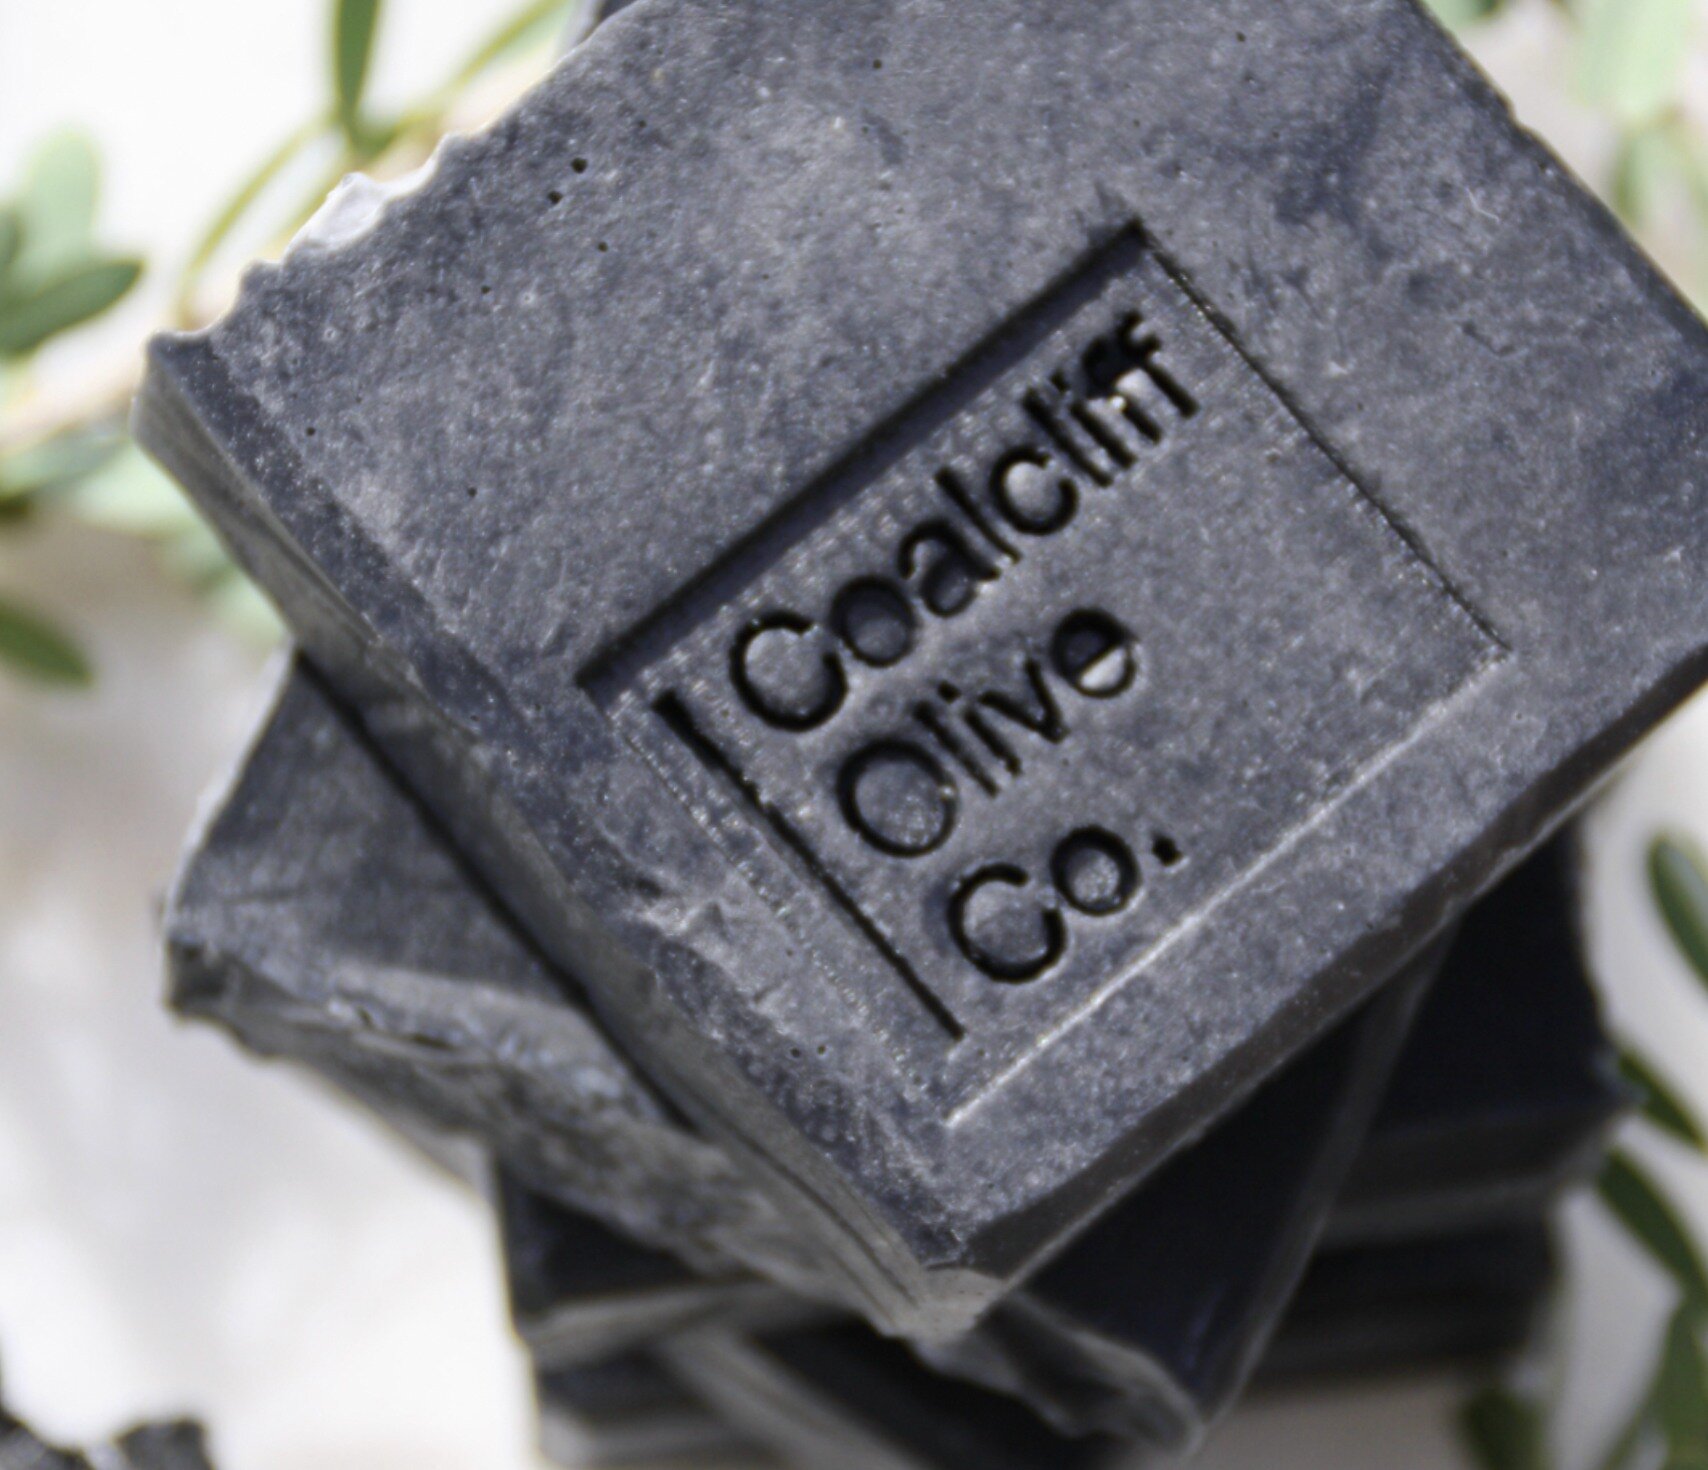 Coalcliff Olive Co. + their Coal Soap @coledalemarkets Twilight - next Wed 21st December, 2-8pm.

Coledale Markets are the Original Coal Coast Markets. Est. 2002 in the grounds of Coledale Public School, 60km south of Sydney along the scenic Grand Pa